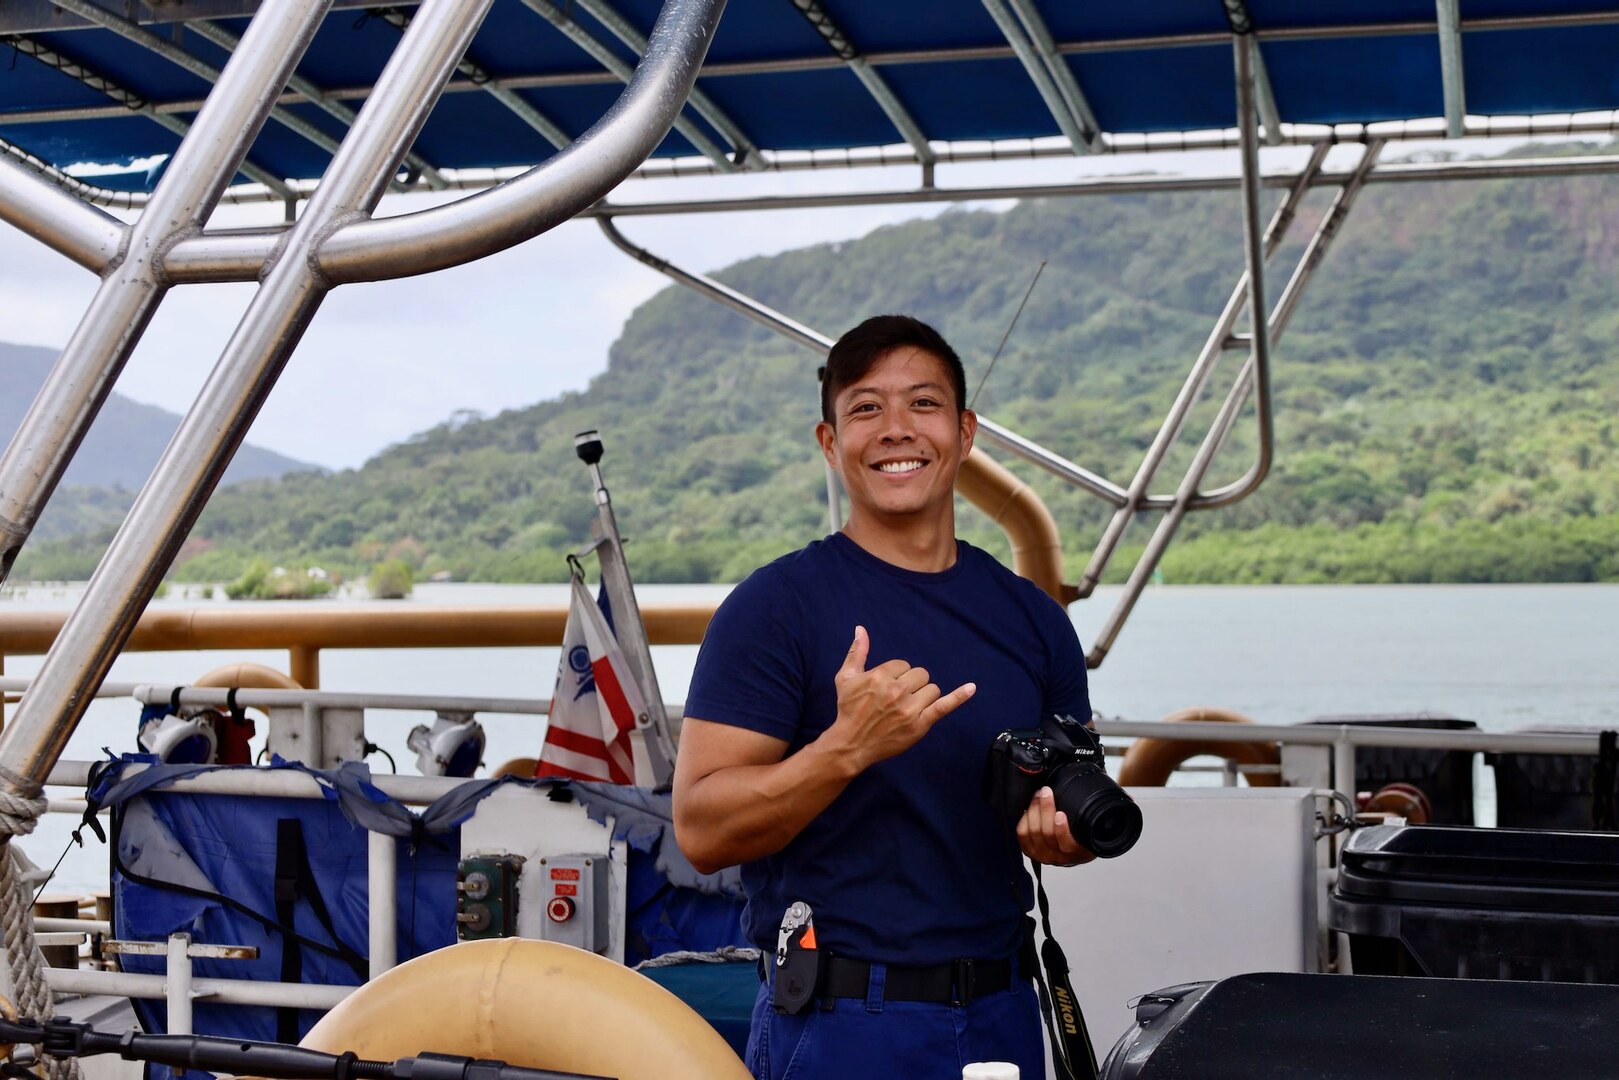 POHNPEI, Federated States of Micronesia — The USCGC Oliver Henry (WPC 1140) crew arrived at Dekhitik Harbor in Pohnpei on Feb. 1 as part of an international effort to deliver essential supplies and equipment to the drought-affected outer islands of Nukuoro and Kapingamarangi Atolls. Due to the El Niño weather phenomenon, these remote communities required immediate assistance, including water purification solutions, to combat the scarcity of potable water.